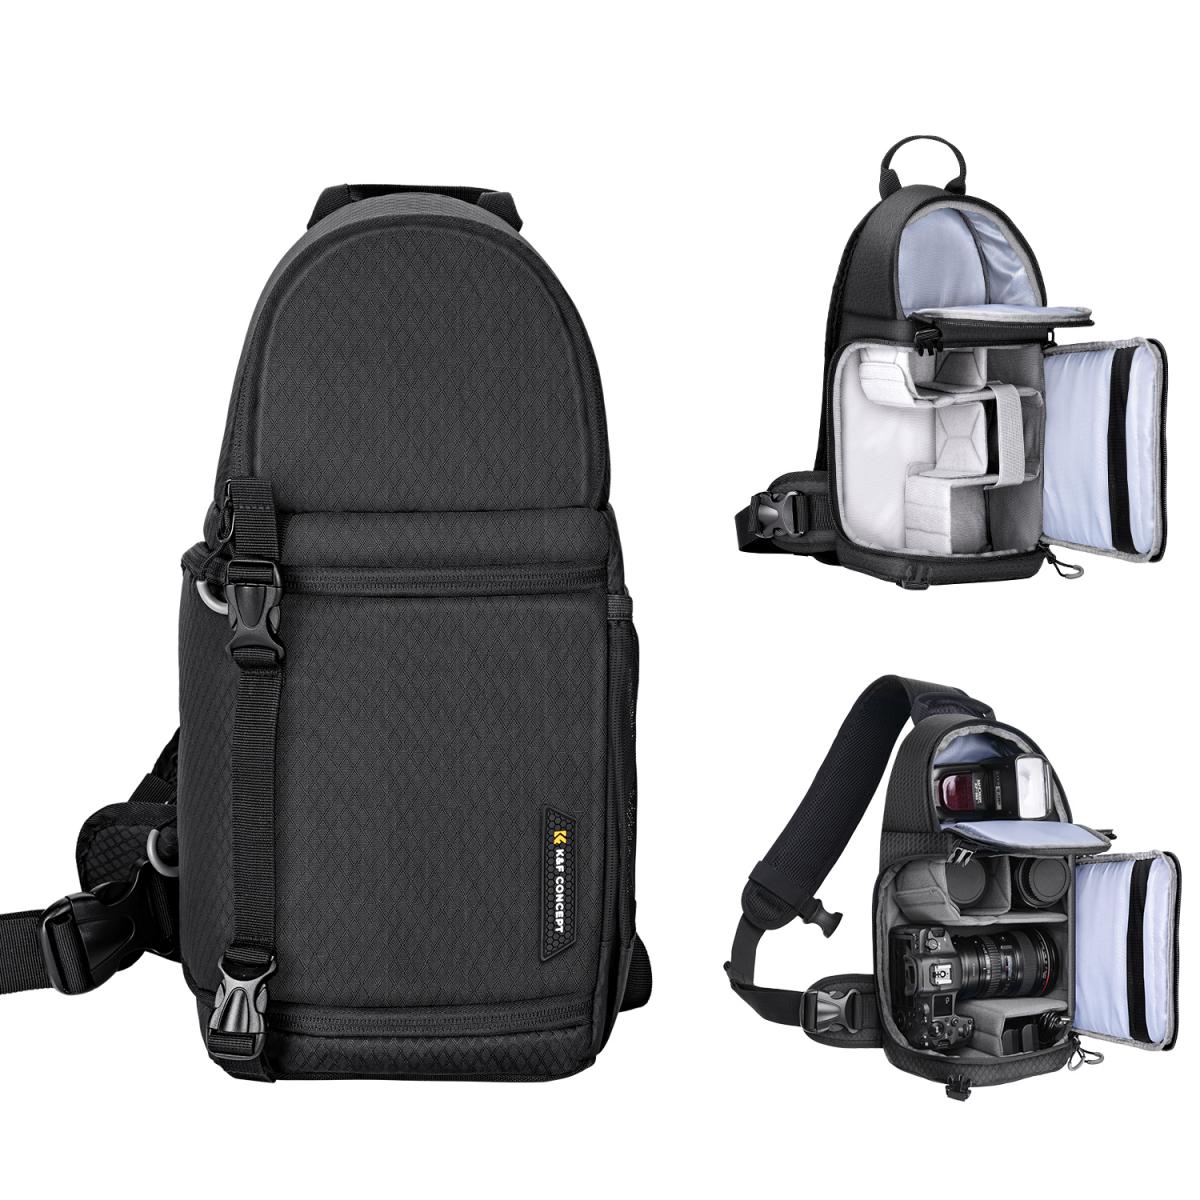 K&F Concept Camera pack Waterproof backpack with adjustable cross-body strap